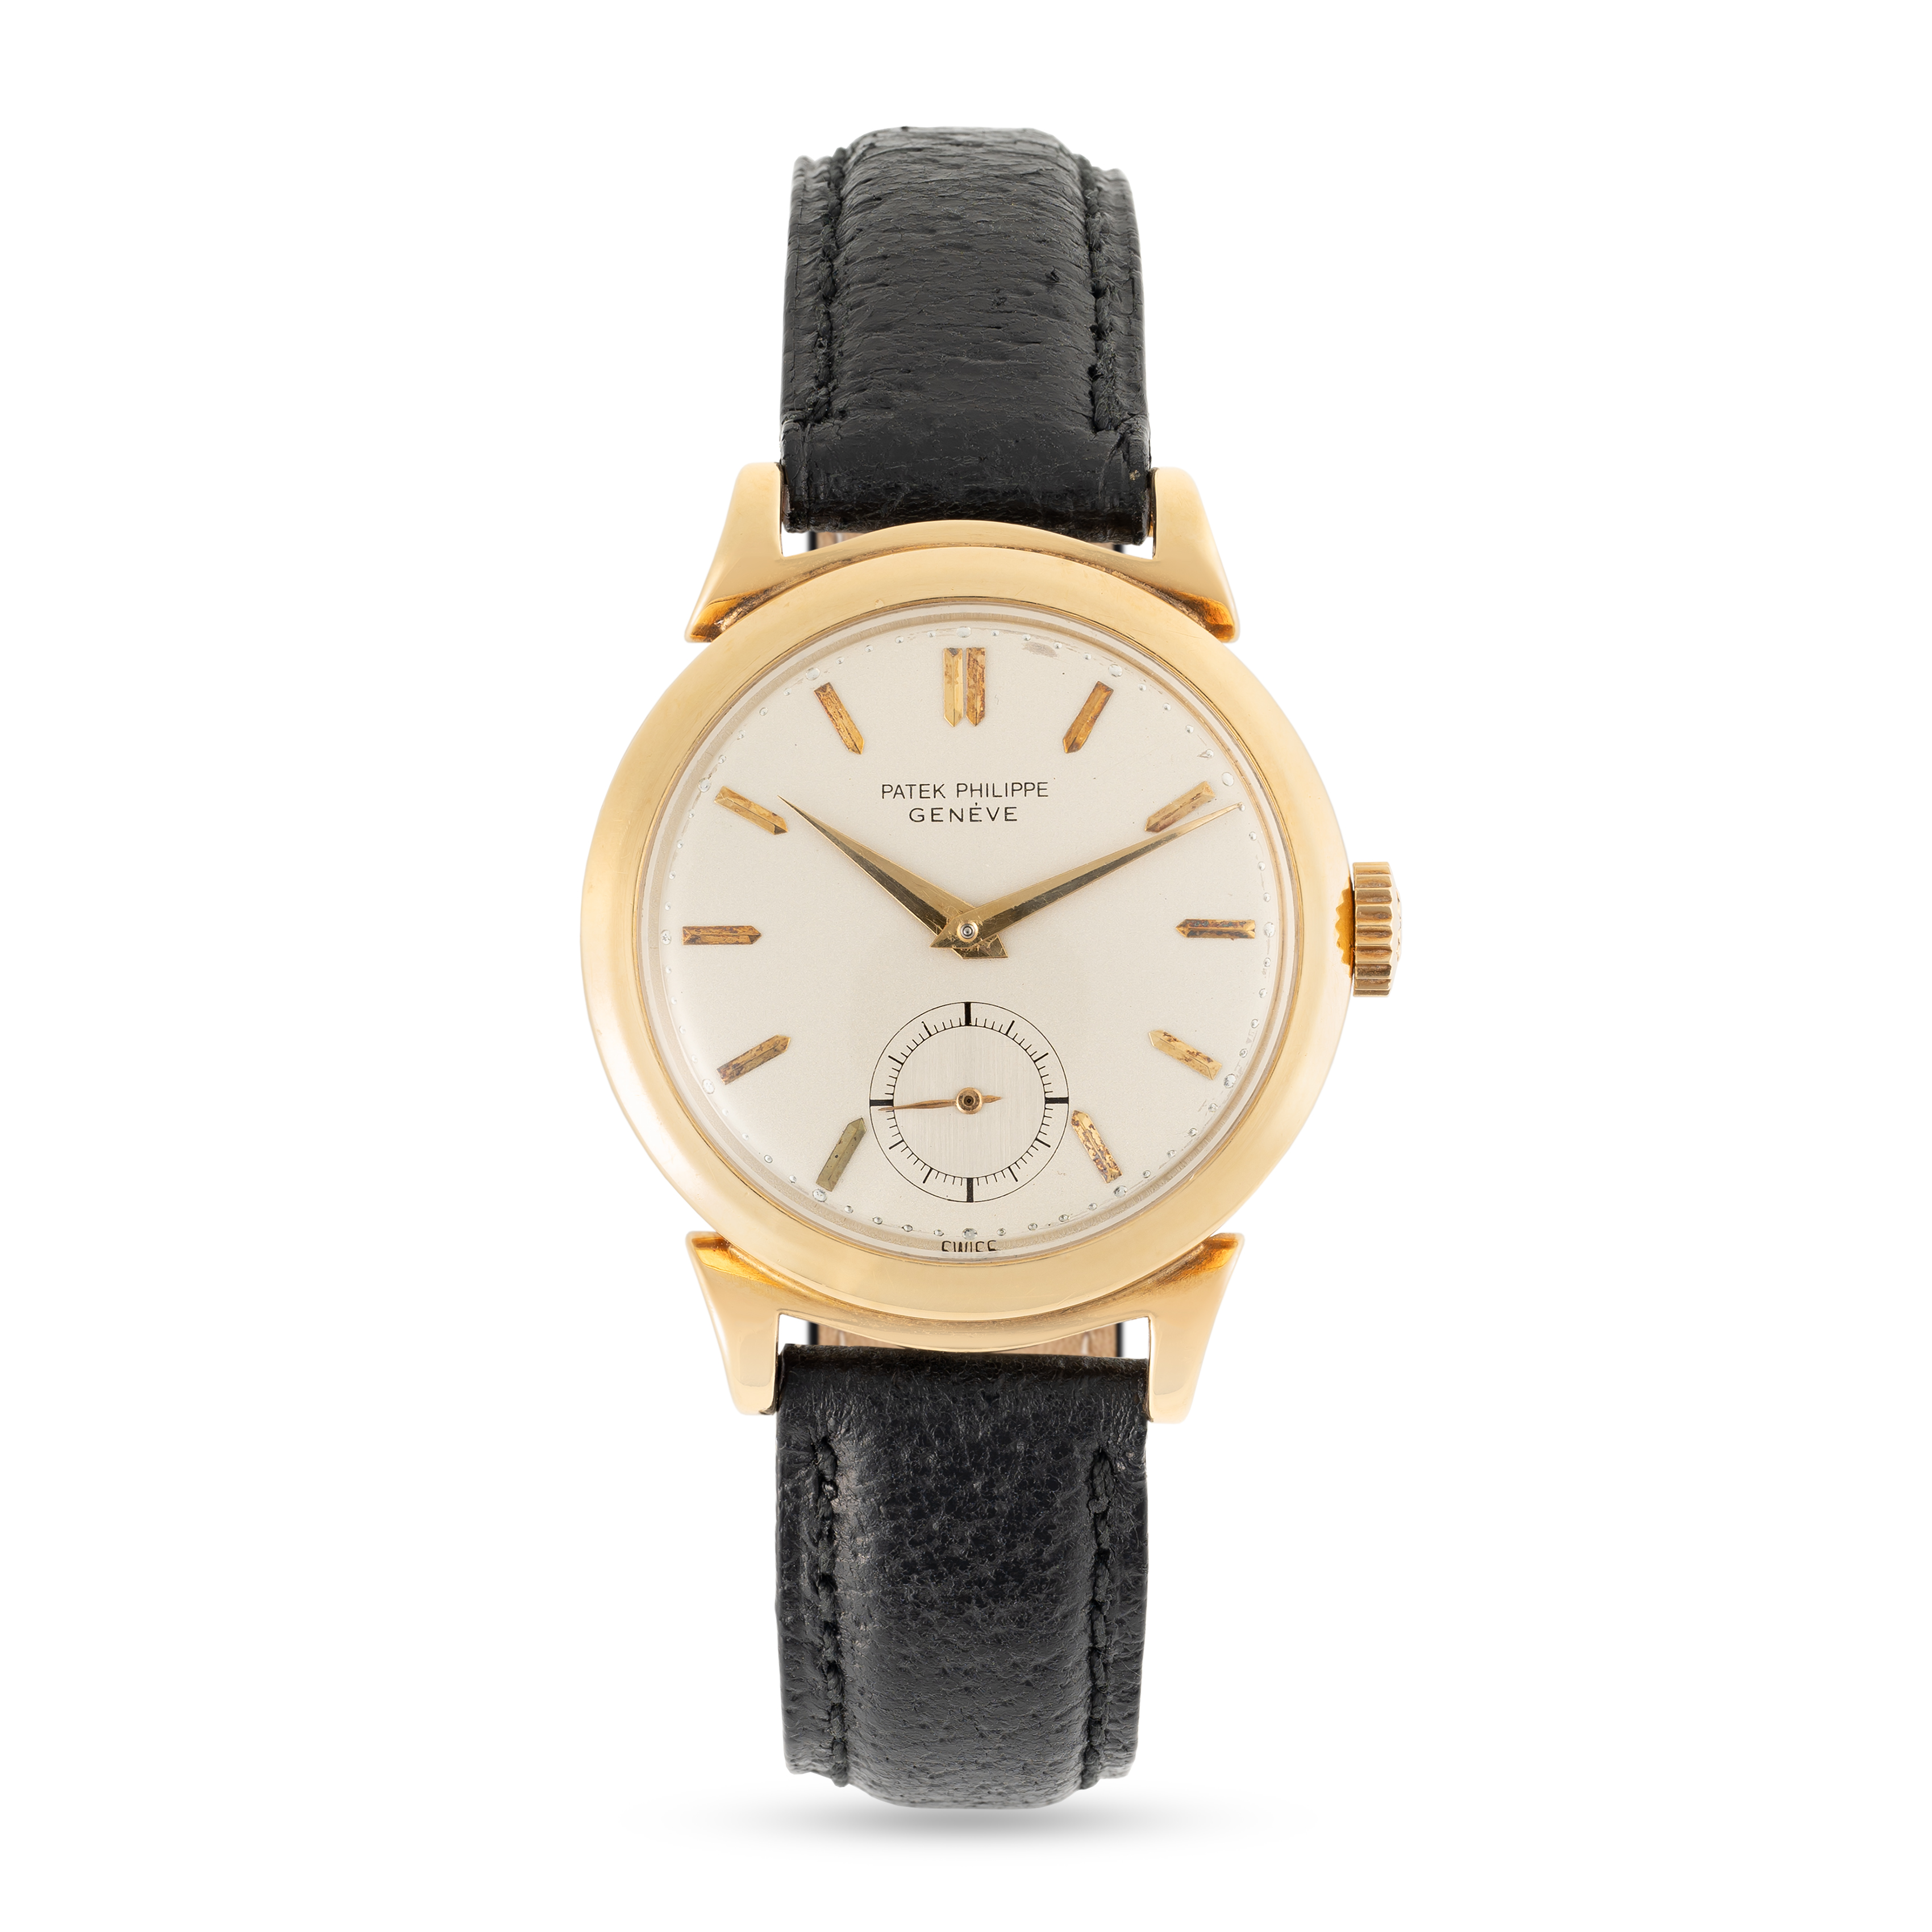 A GENTLEMAN'S SIZE 18K SOLID YELLOW GOLD PATEK PHILIPPE WRIST WATCH CIRCA 1950s, REF. 1491 CASE WITH - Image 2 of 8